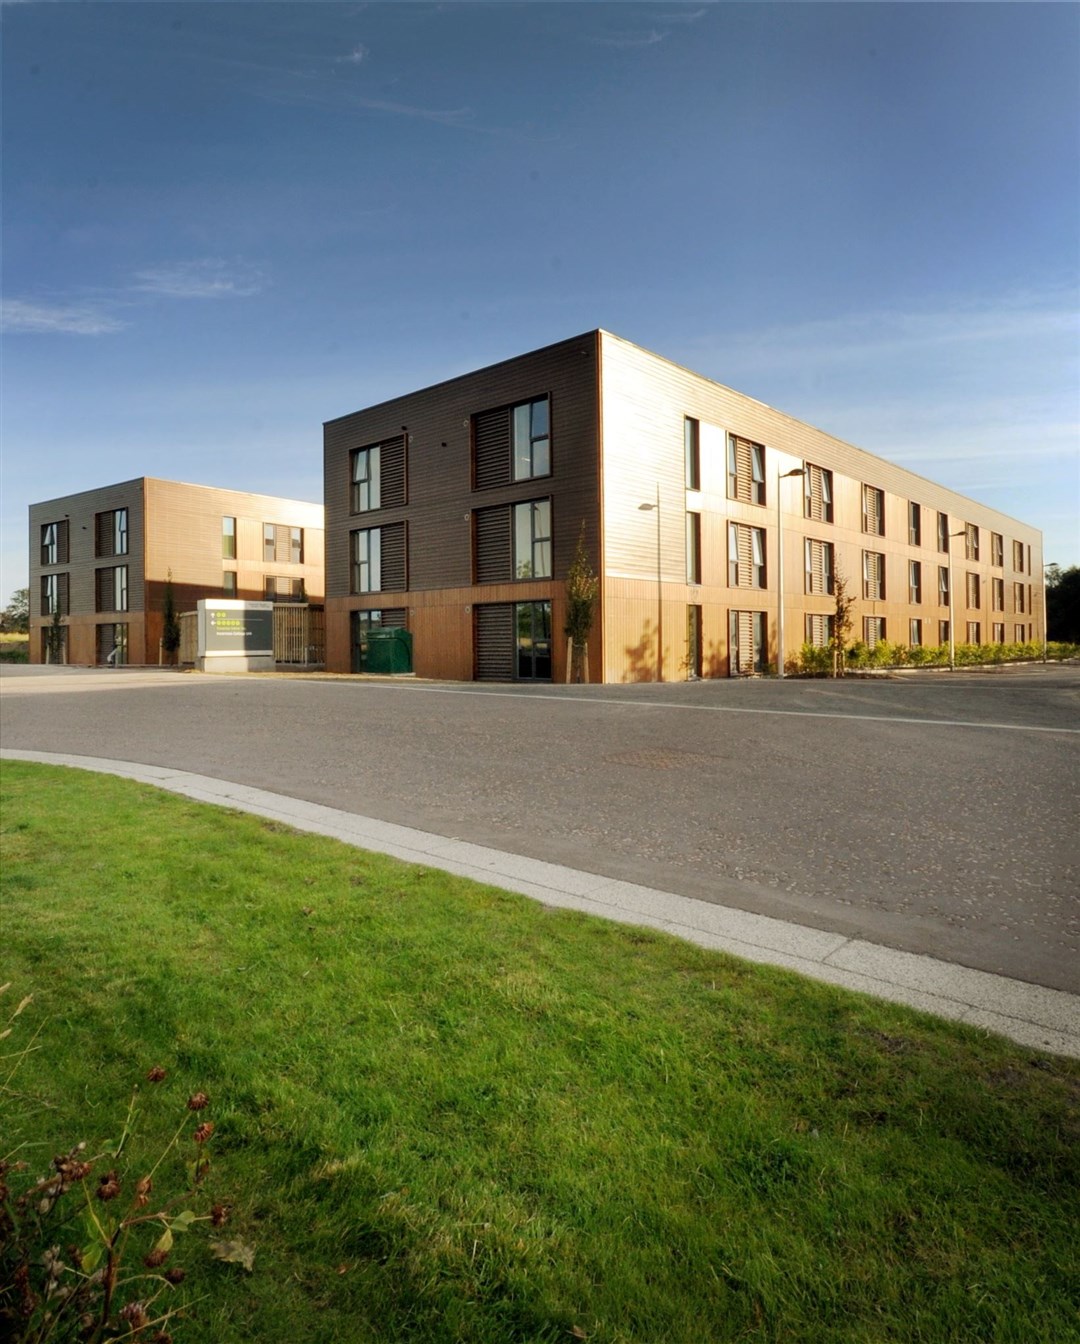 Student accommodation at Inverness Campus.